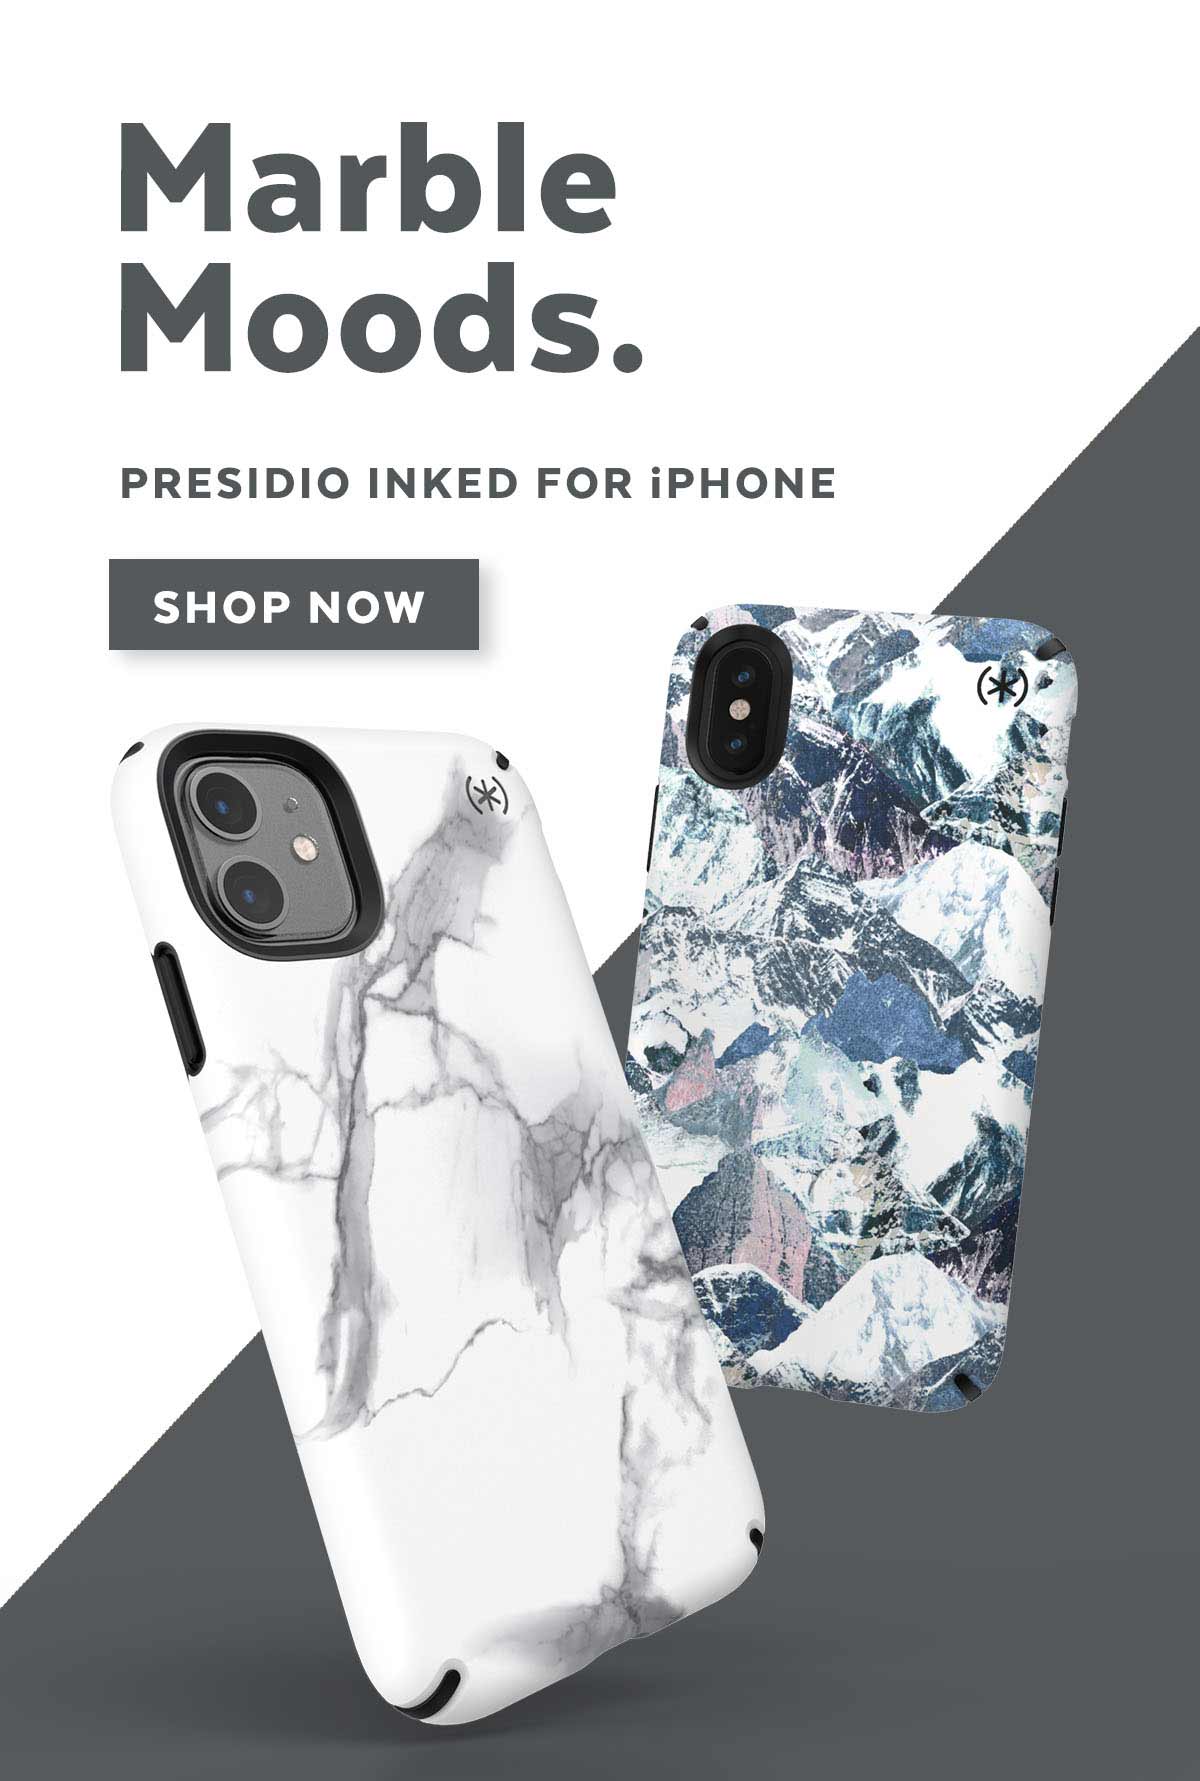 Marble Moods. Presidio Inked for iPhone. Shop now!